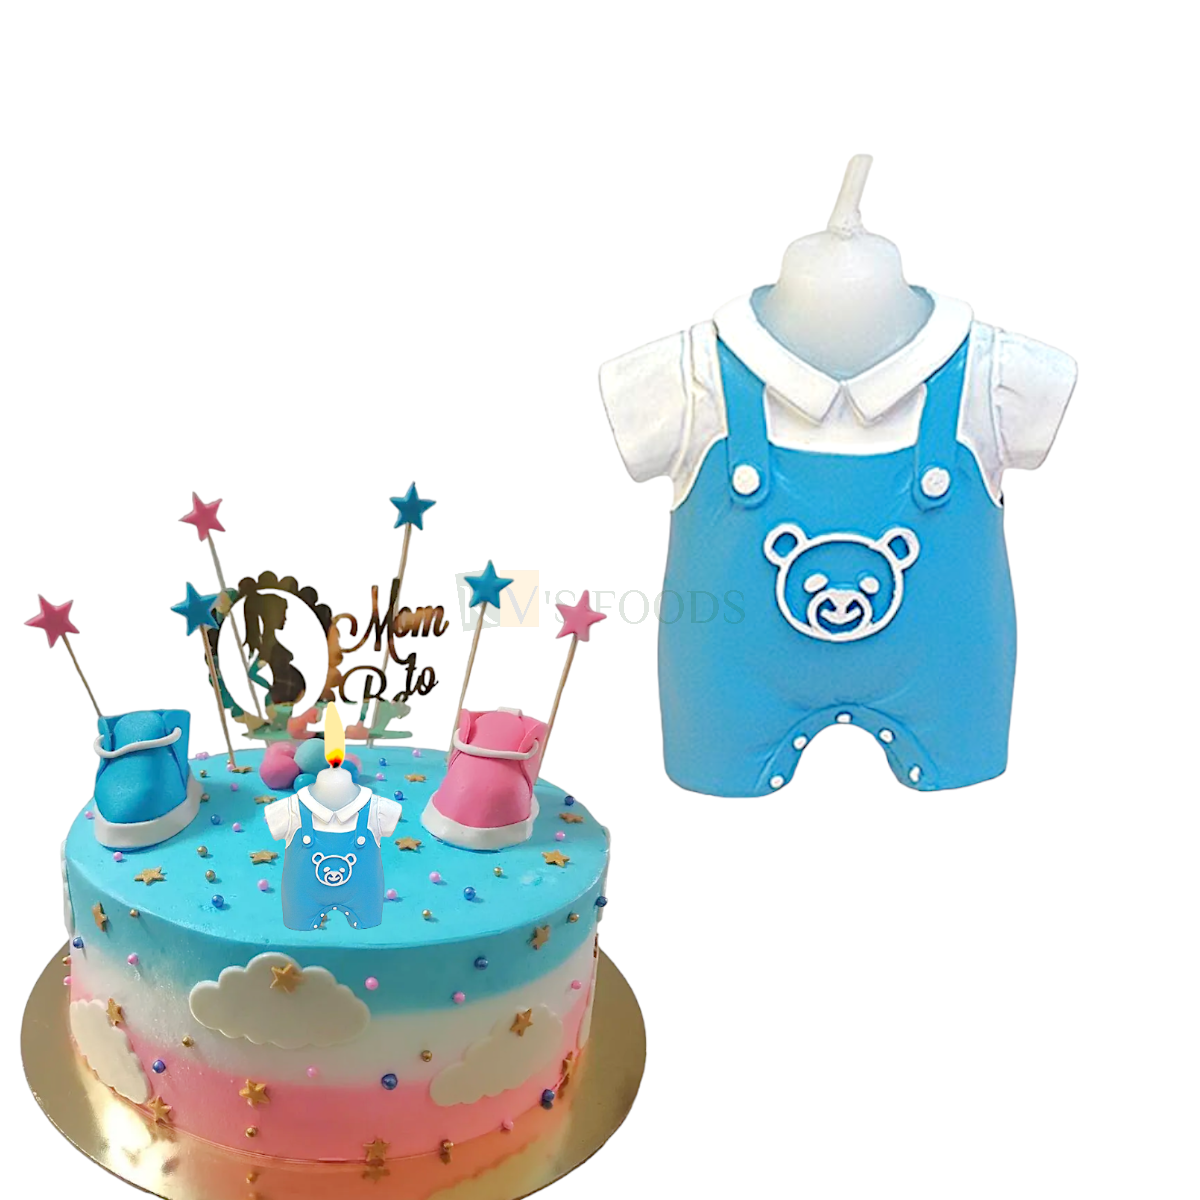 1 PC Light Blue Small Cute Suspender Trousers Baby Boy Dress Baby Shower Cake and Cupcake Wax Candles Kids Children's Happy Birthday Theme, Small Home Celebrations Party DIY Cake Decoration